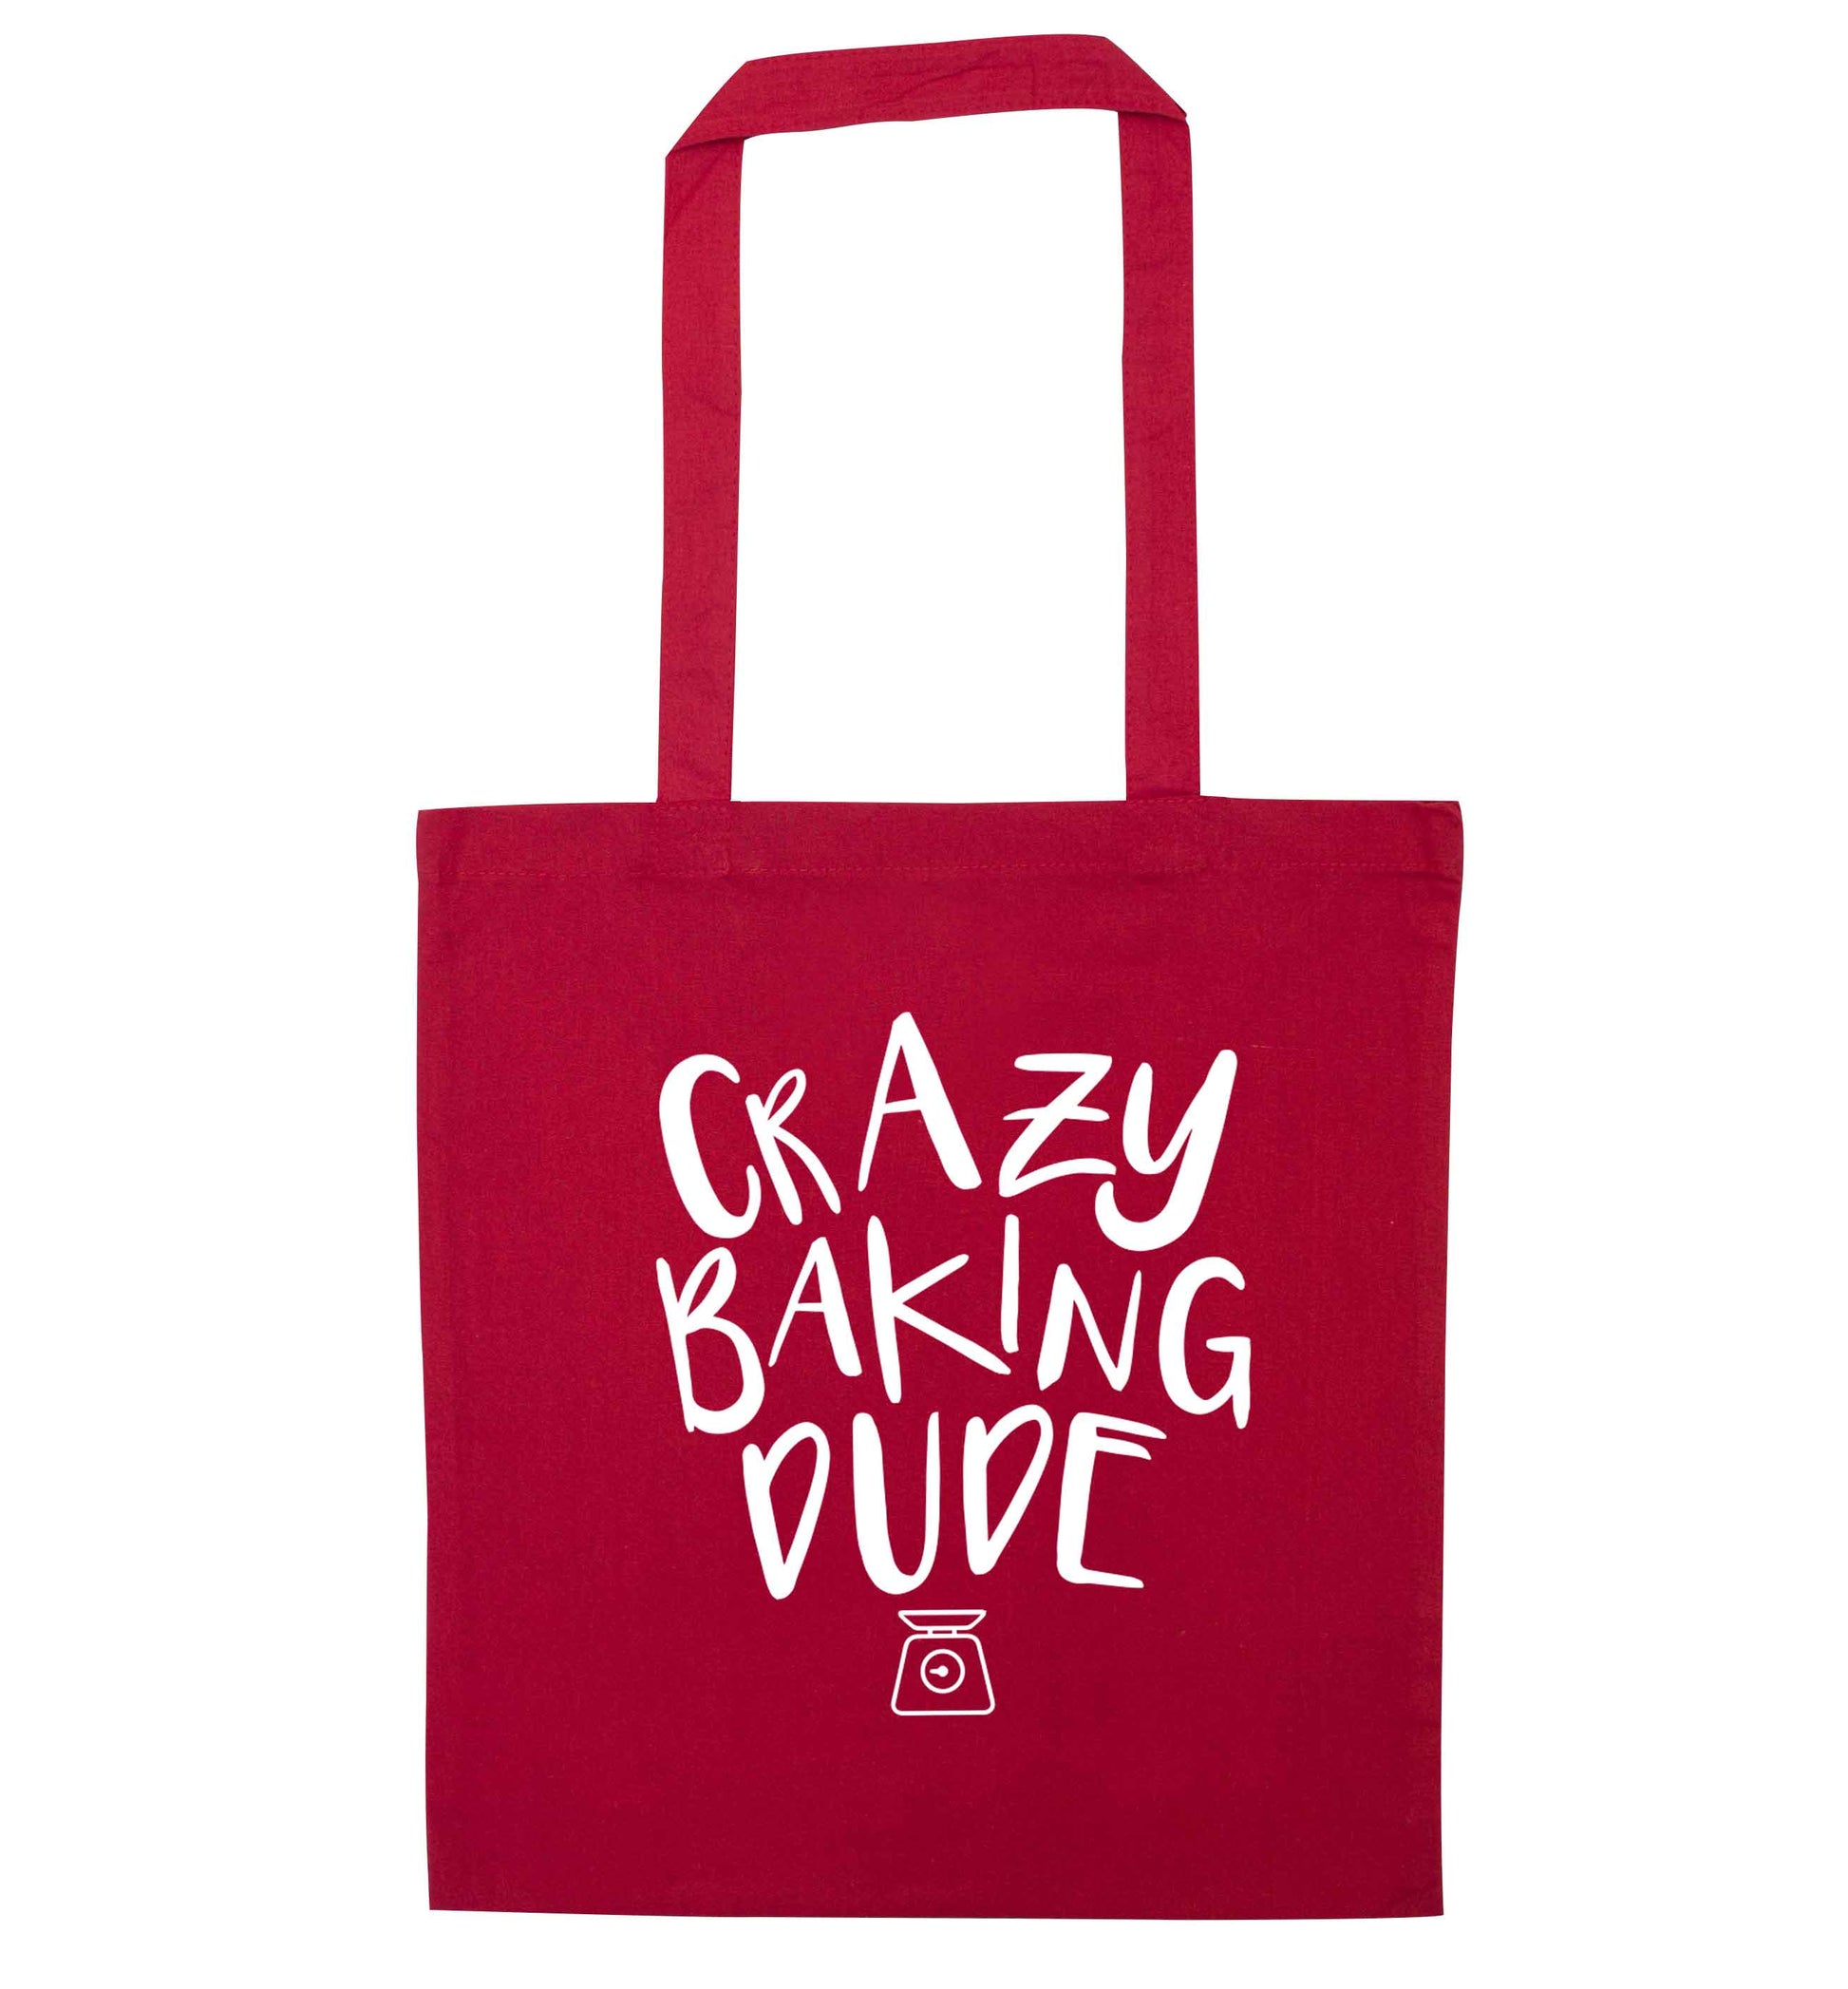 Crazy baking dude red tote bag